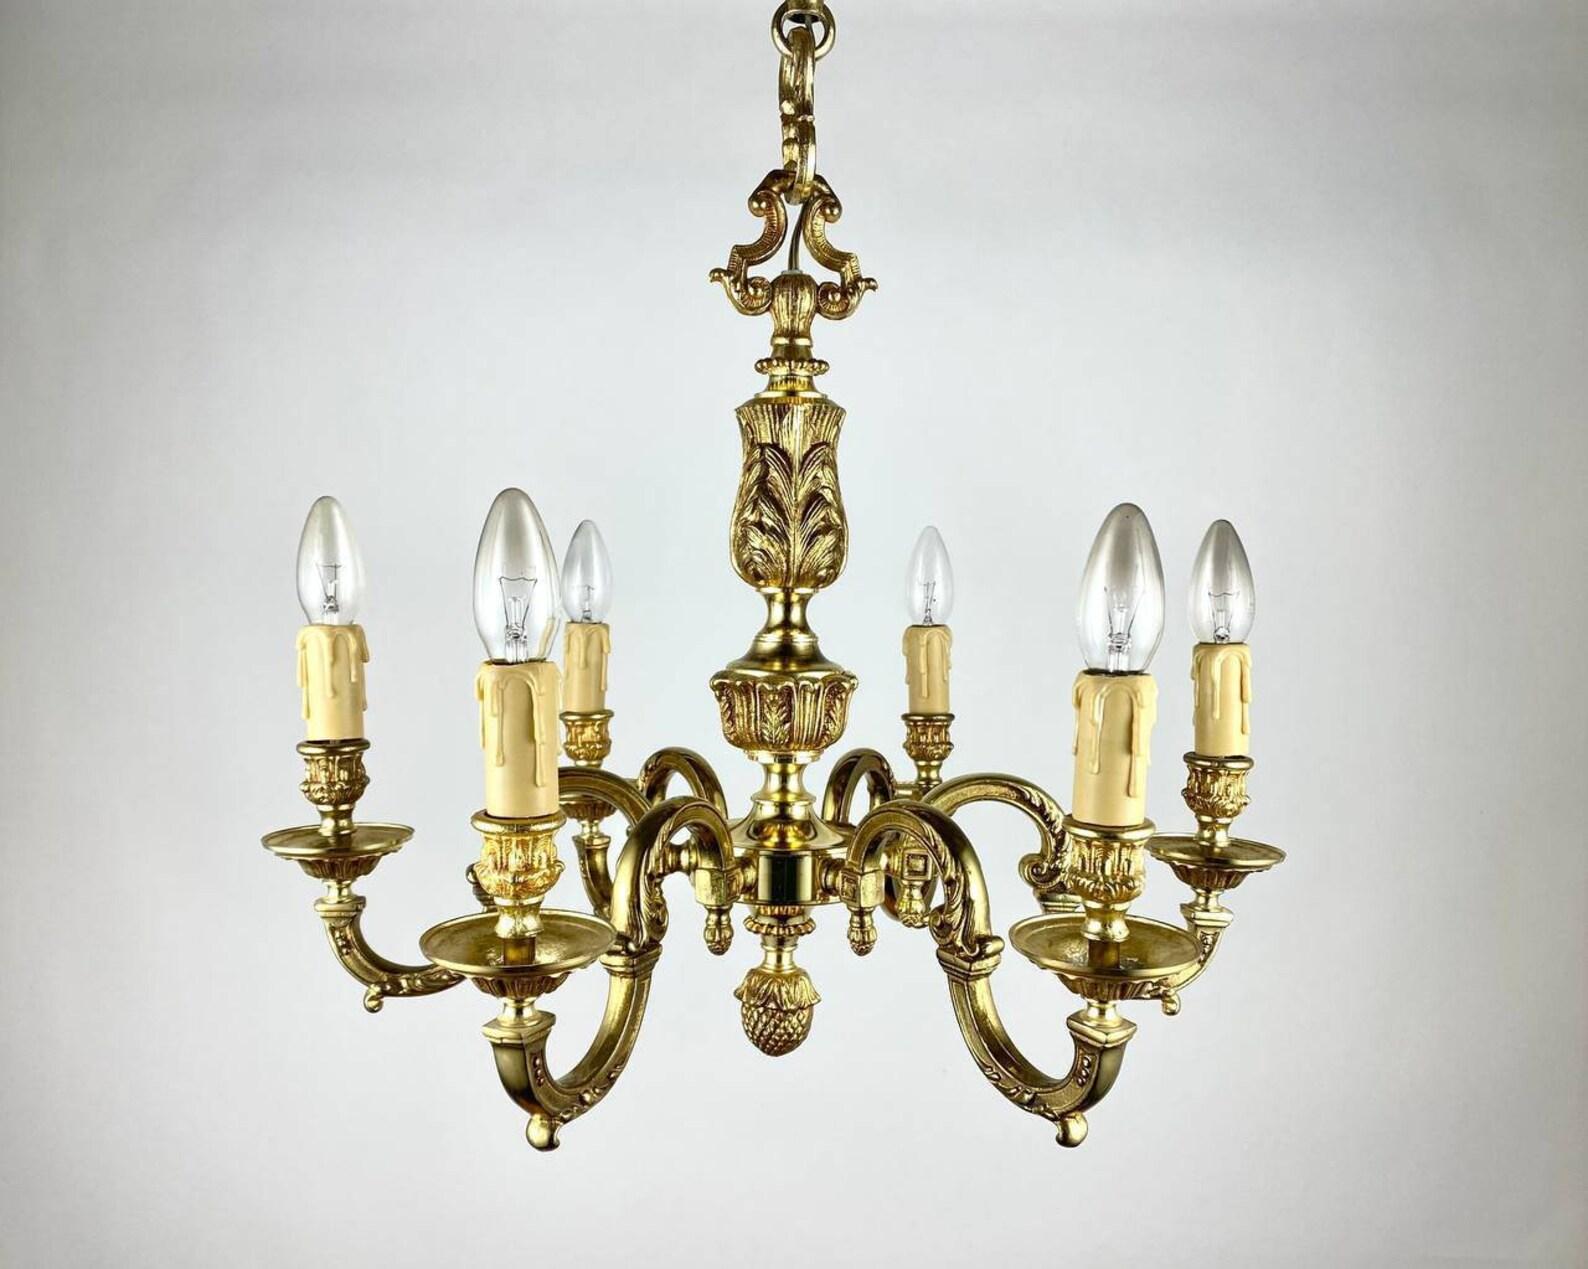 Unknown Magnificent Bronze Chandelier In Empire Style  Six Light Pendant Lighting For Sale